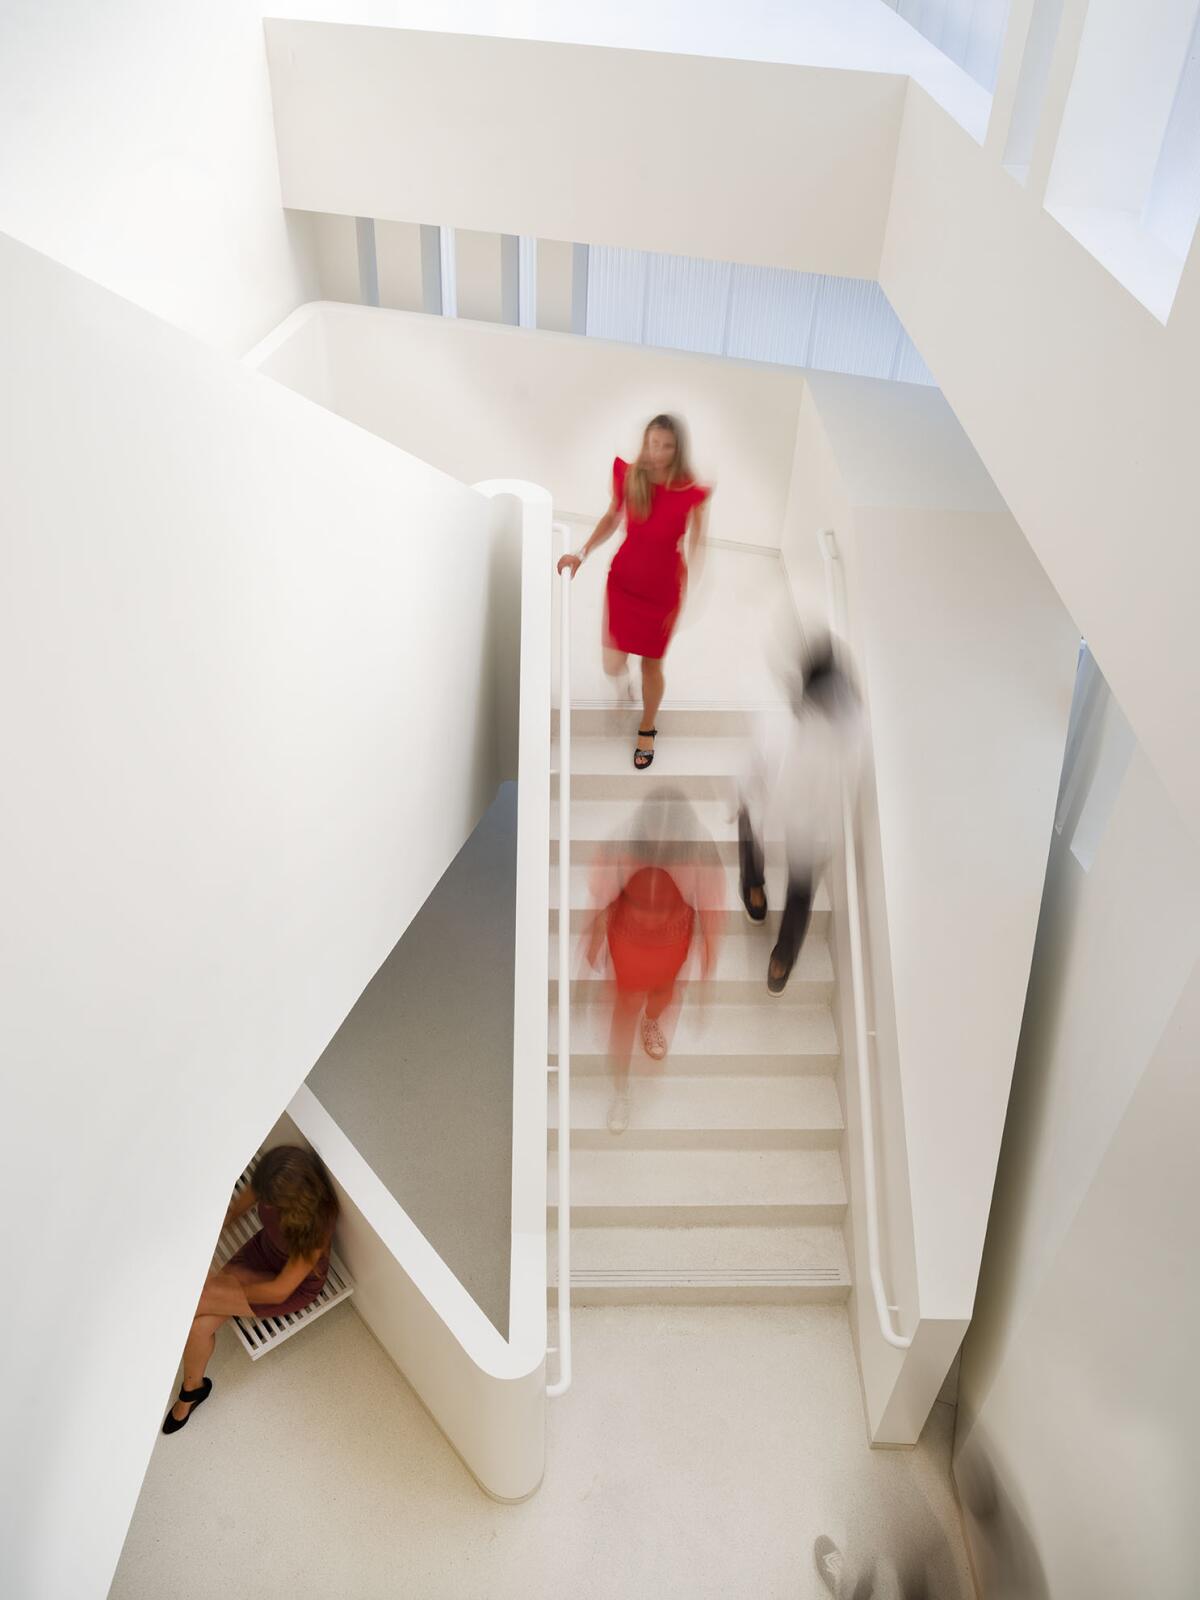 An overhead view shows people ascending and descending a set of gracefully designed stairs.